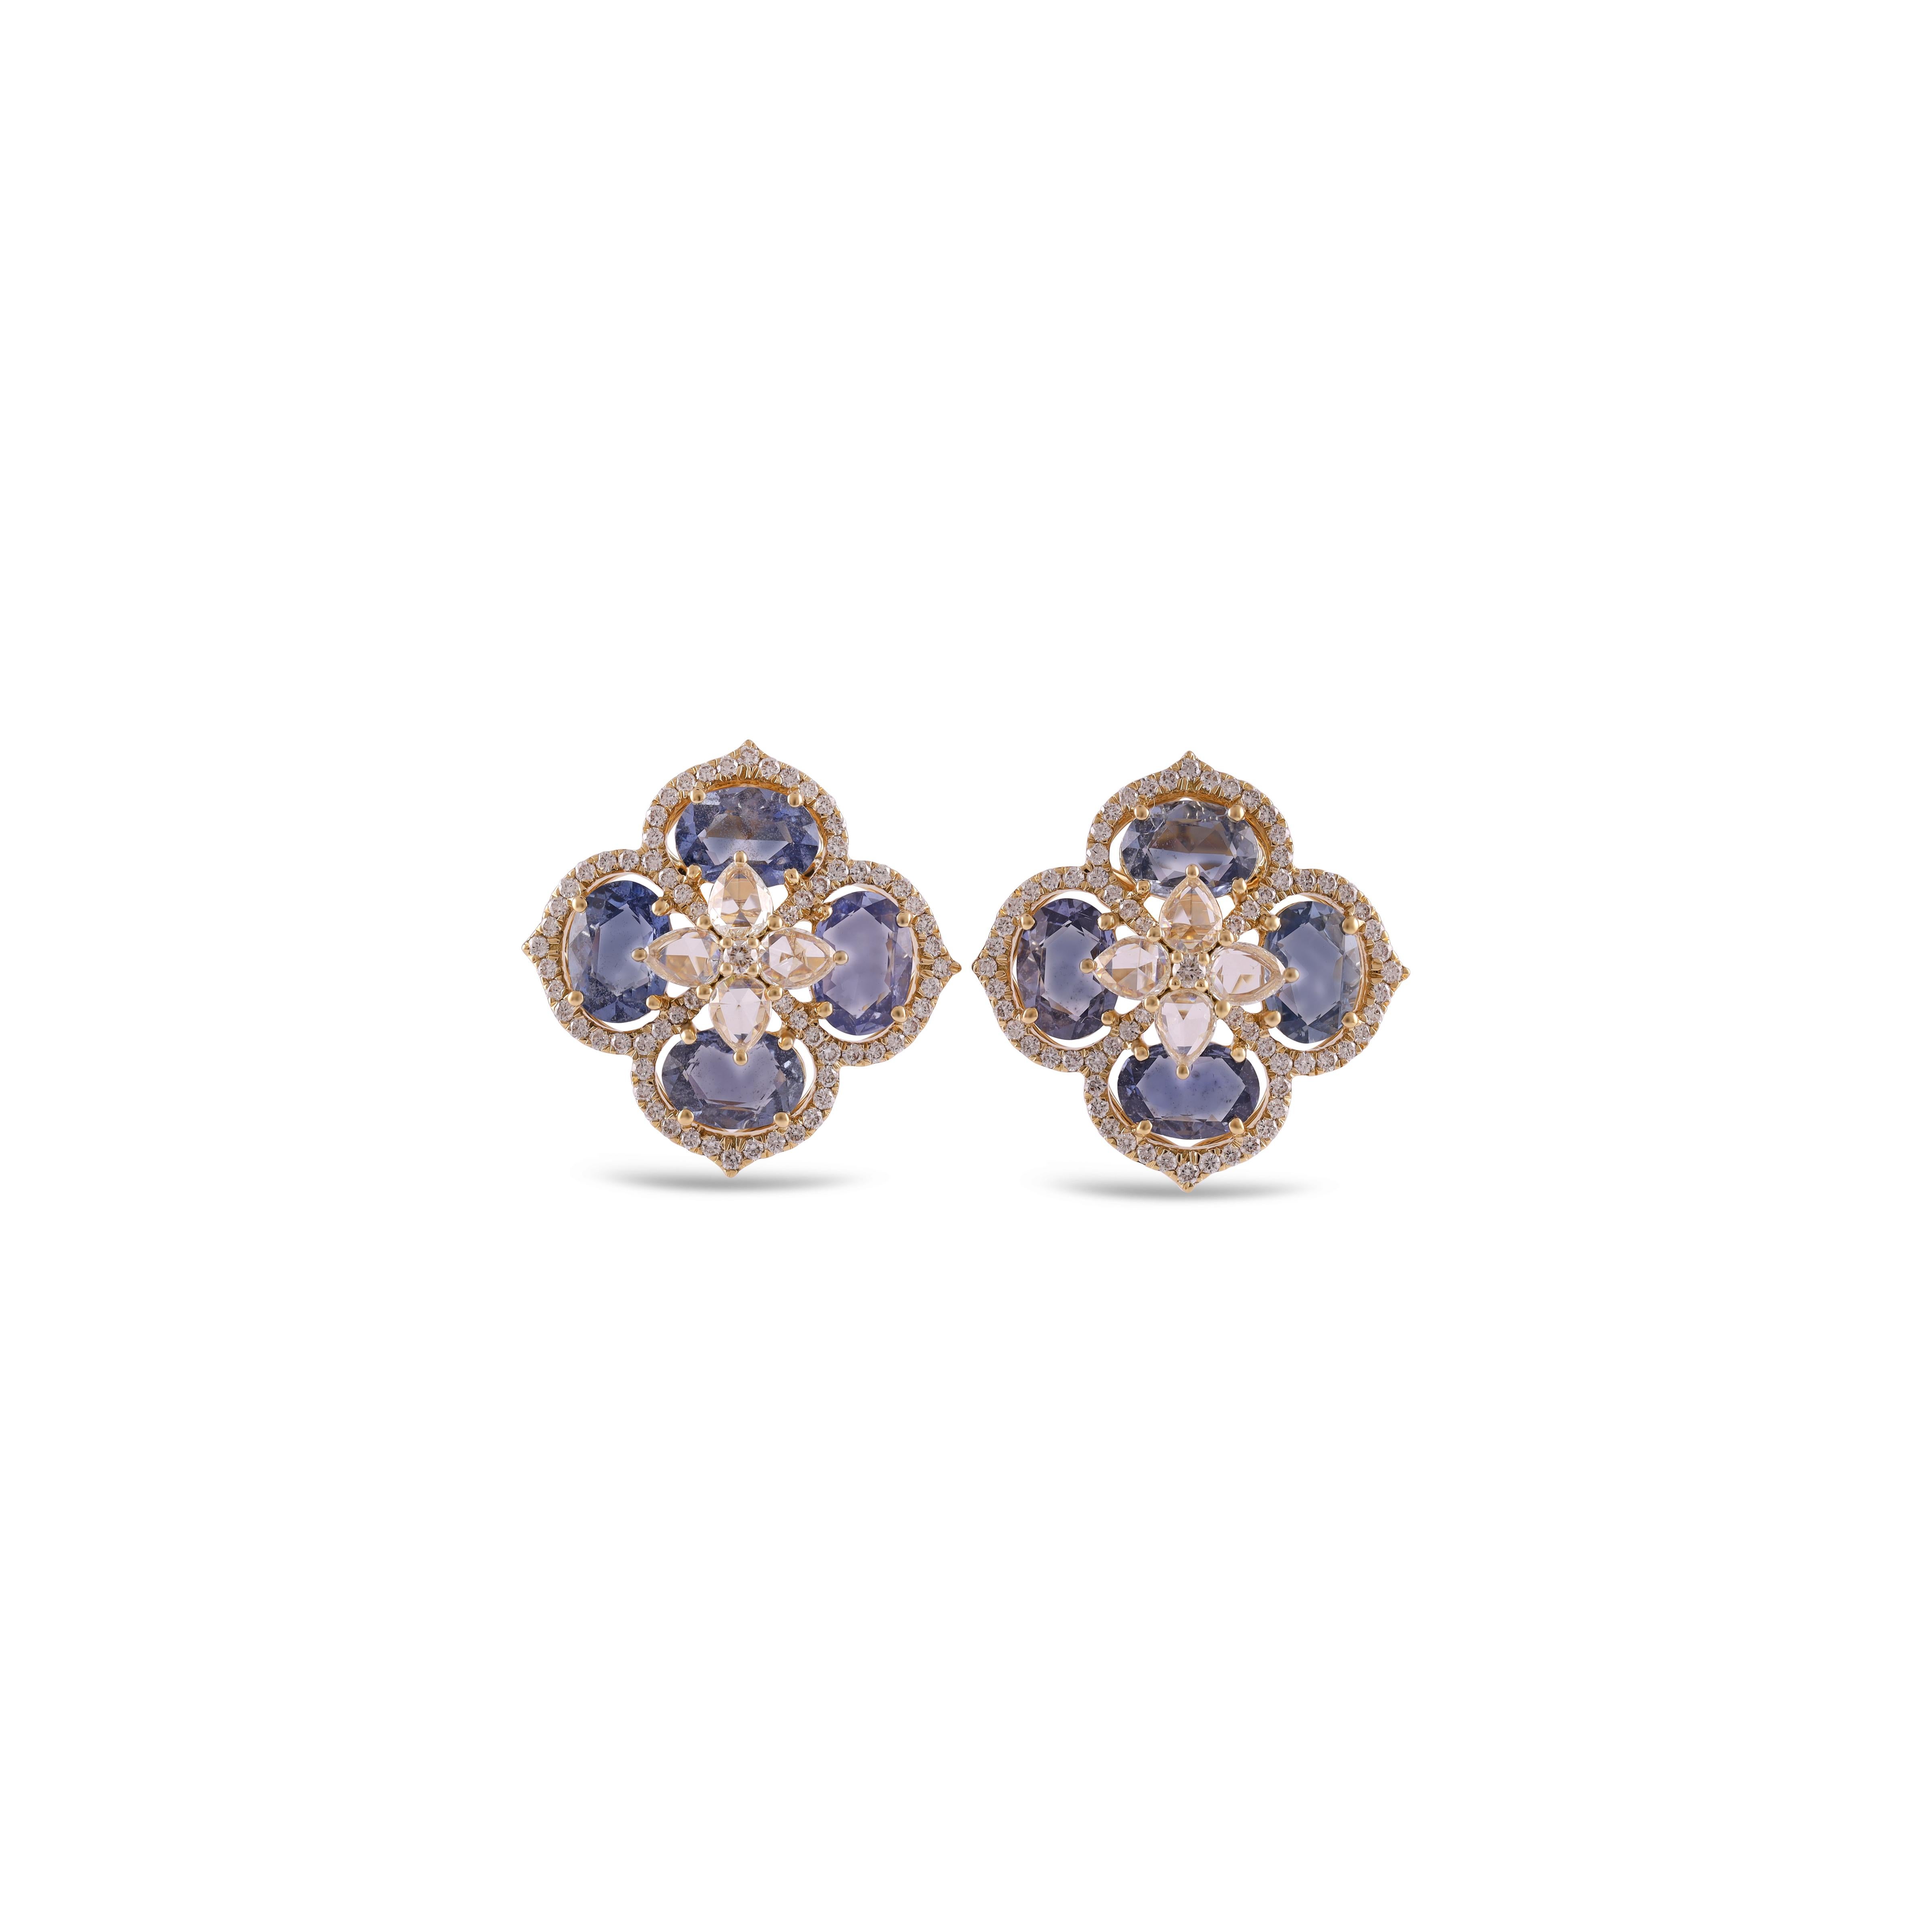 Contemporary 6.09 Carat  Blue Sapphire Earrings in Yellow Gold with Diamonds.  For Sale